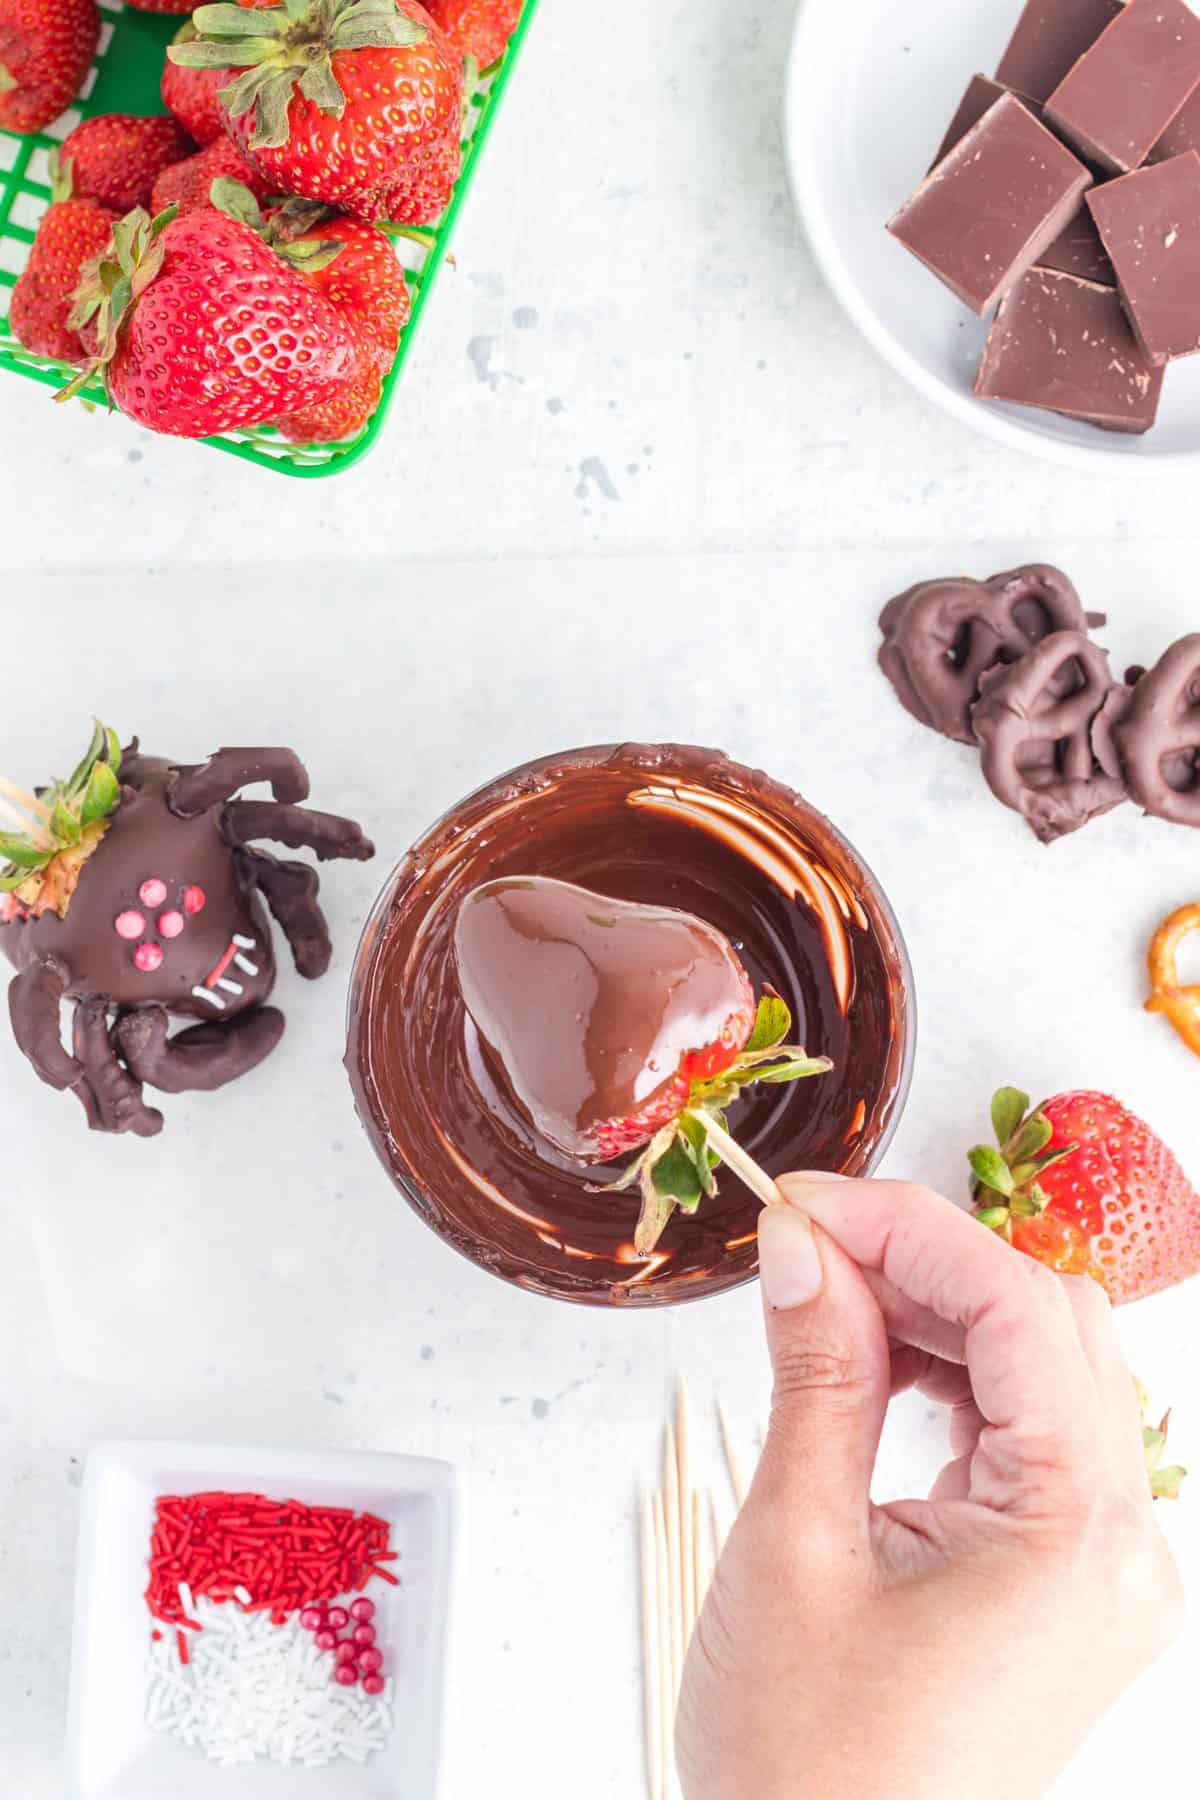 Hand dipping the strawberry into the bowl of melted chocolate. 